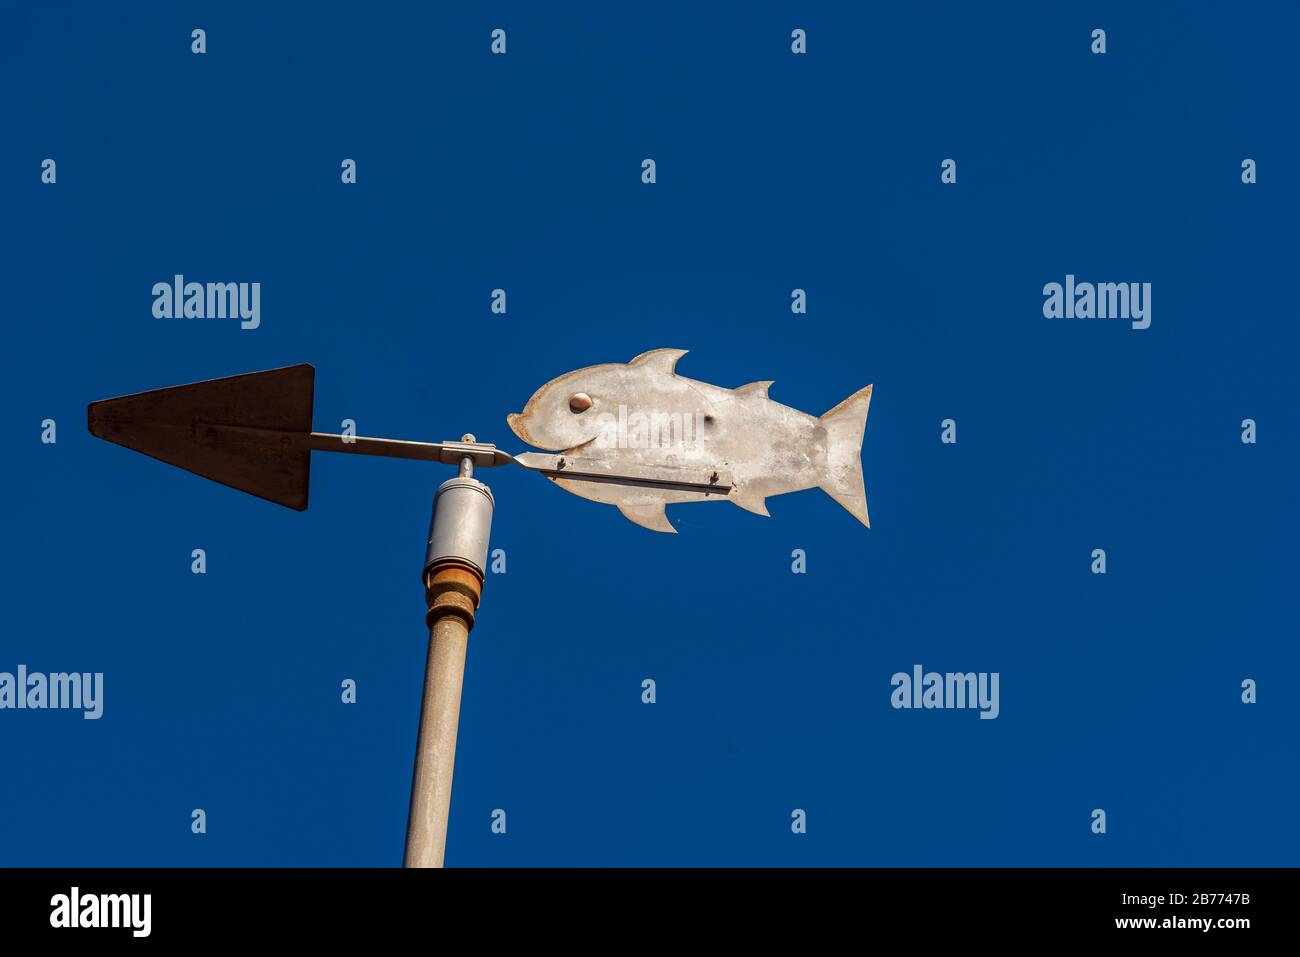 Metalic vane with the shape of a fish with a clean blue sky background Stock Photo